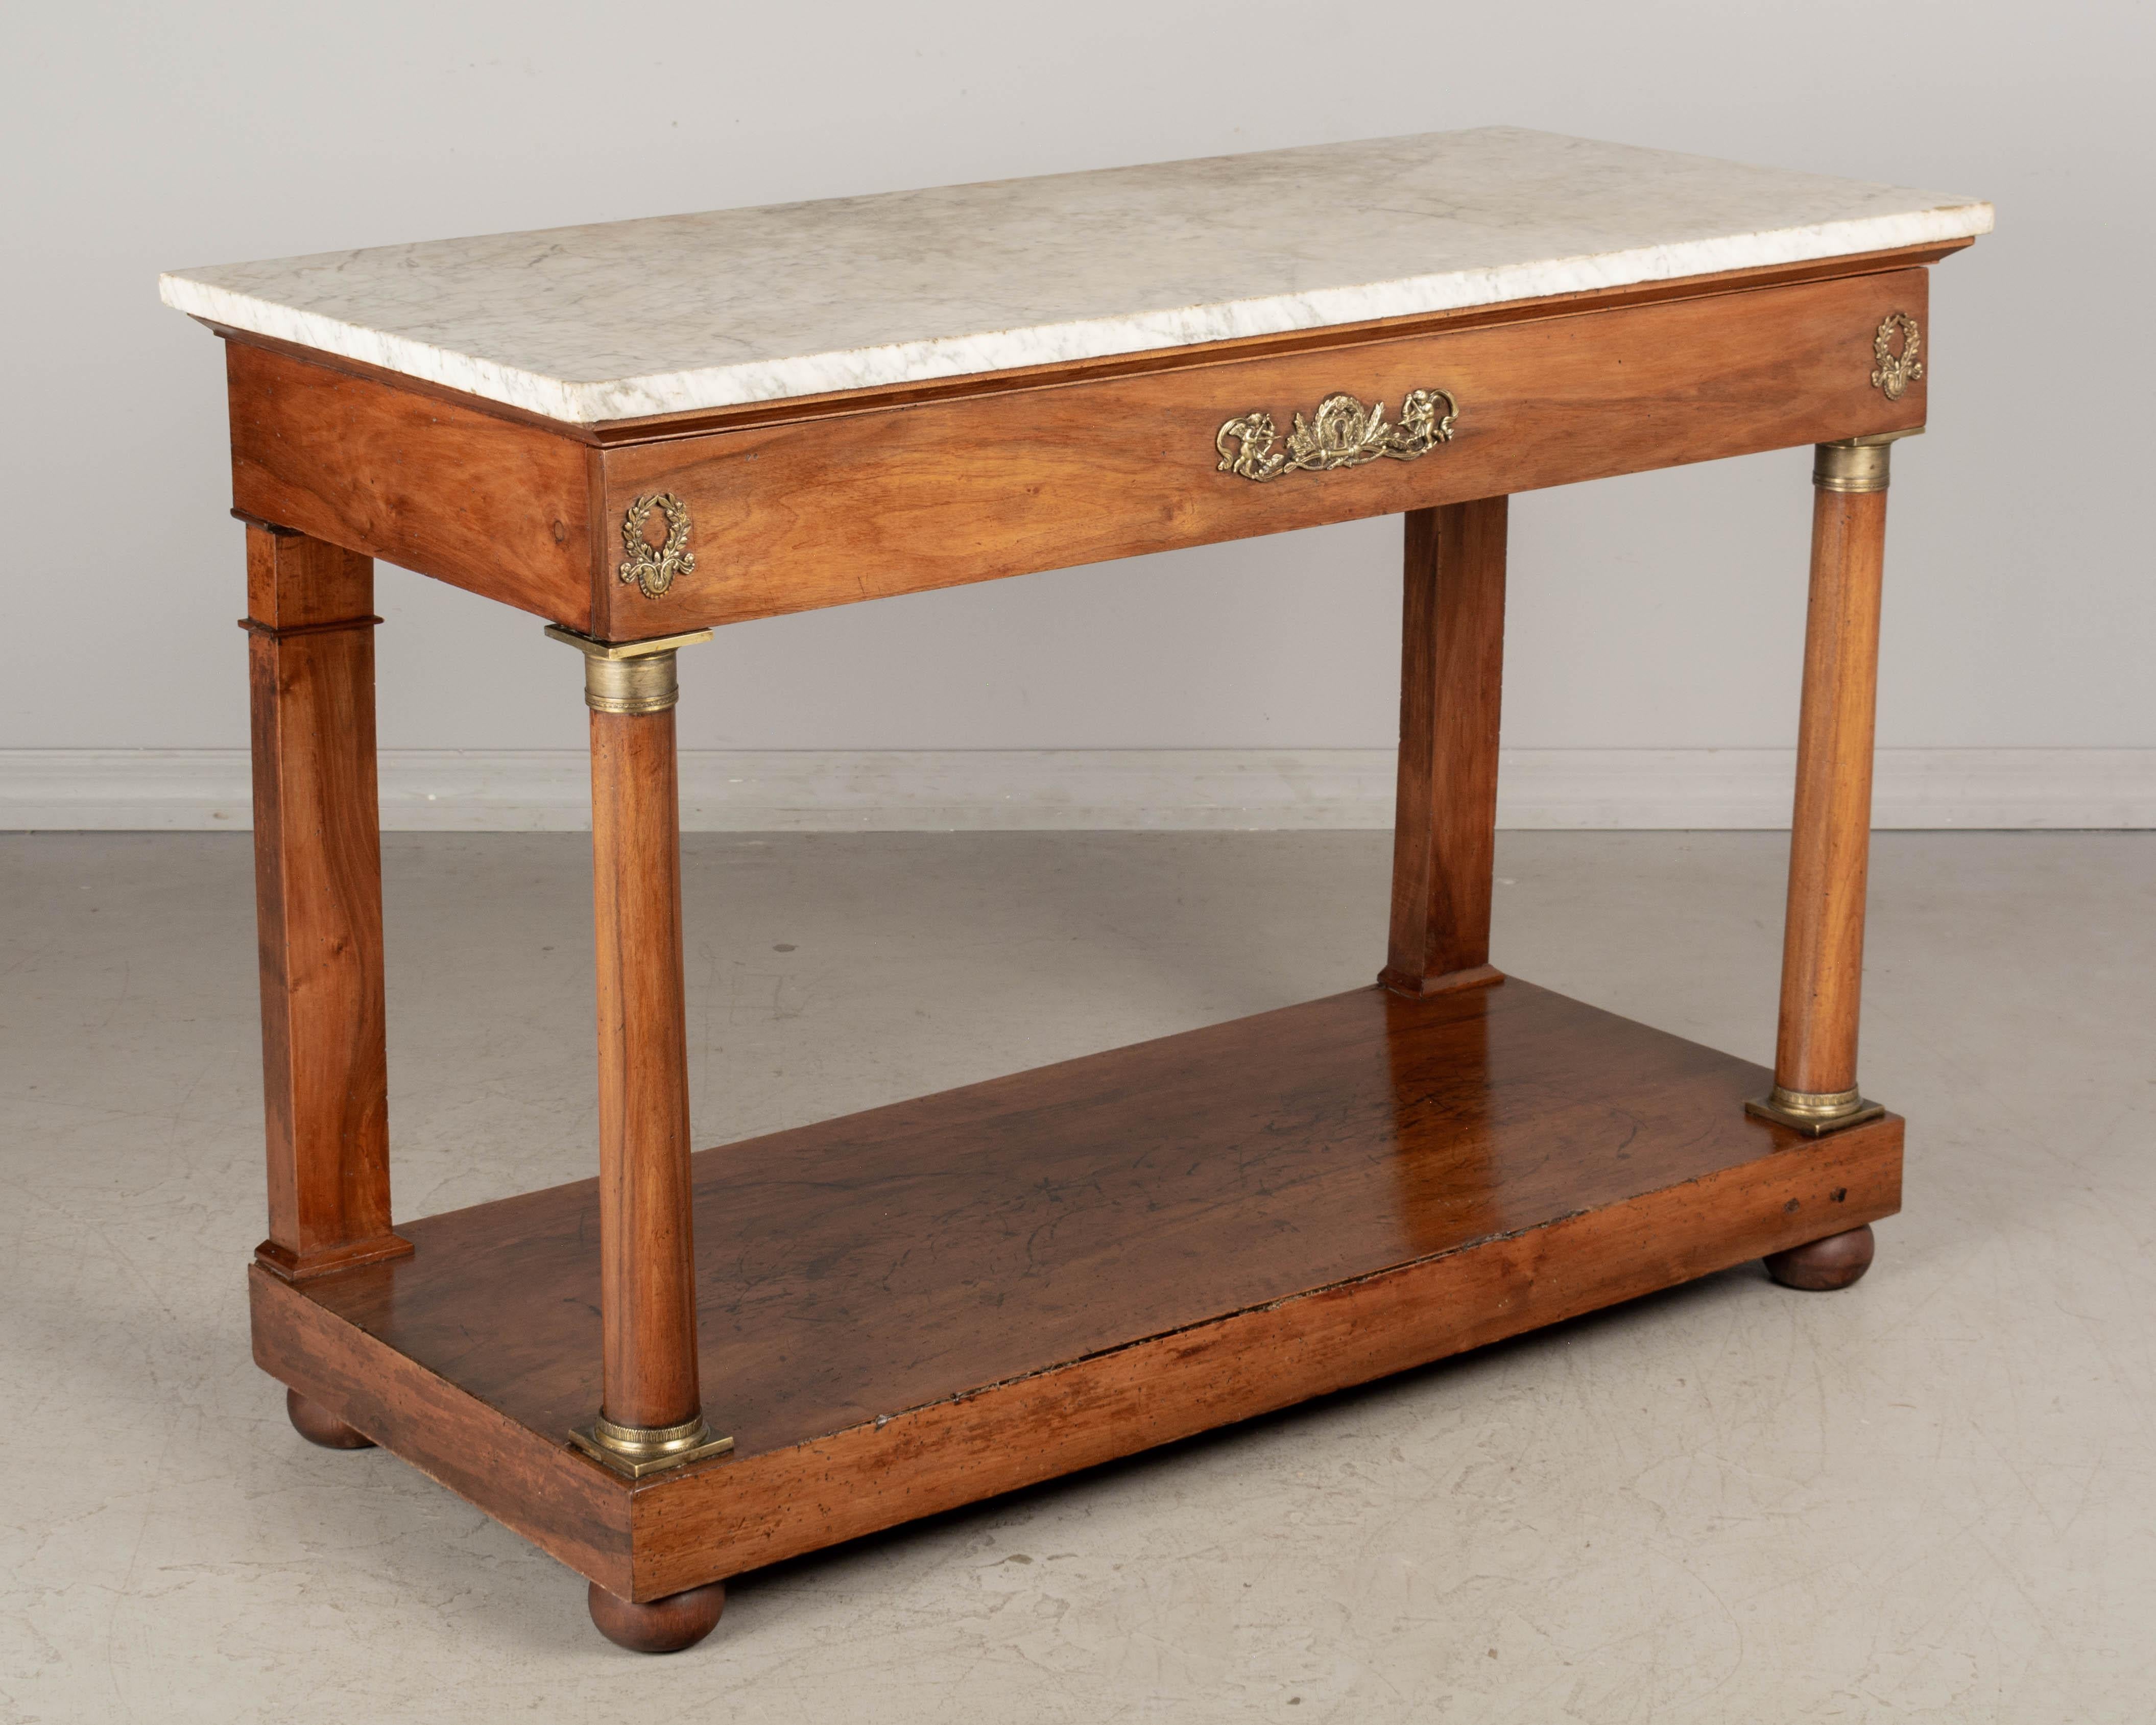 An early 19th century French Empire marble-top console table made of solid walnut. Large drawer with original fine cast bronze decoration. Bronze mounted turned column supports in front. Dovetailed construction. Pine as a secondary wood. New bun